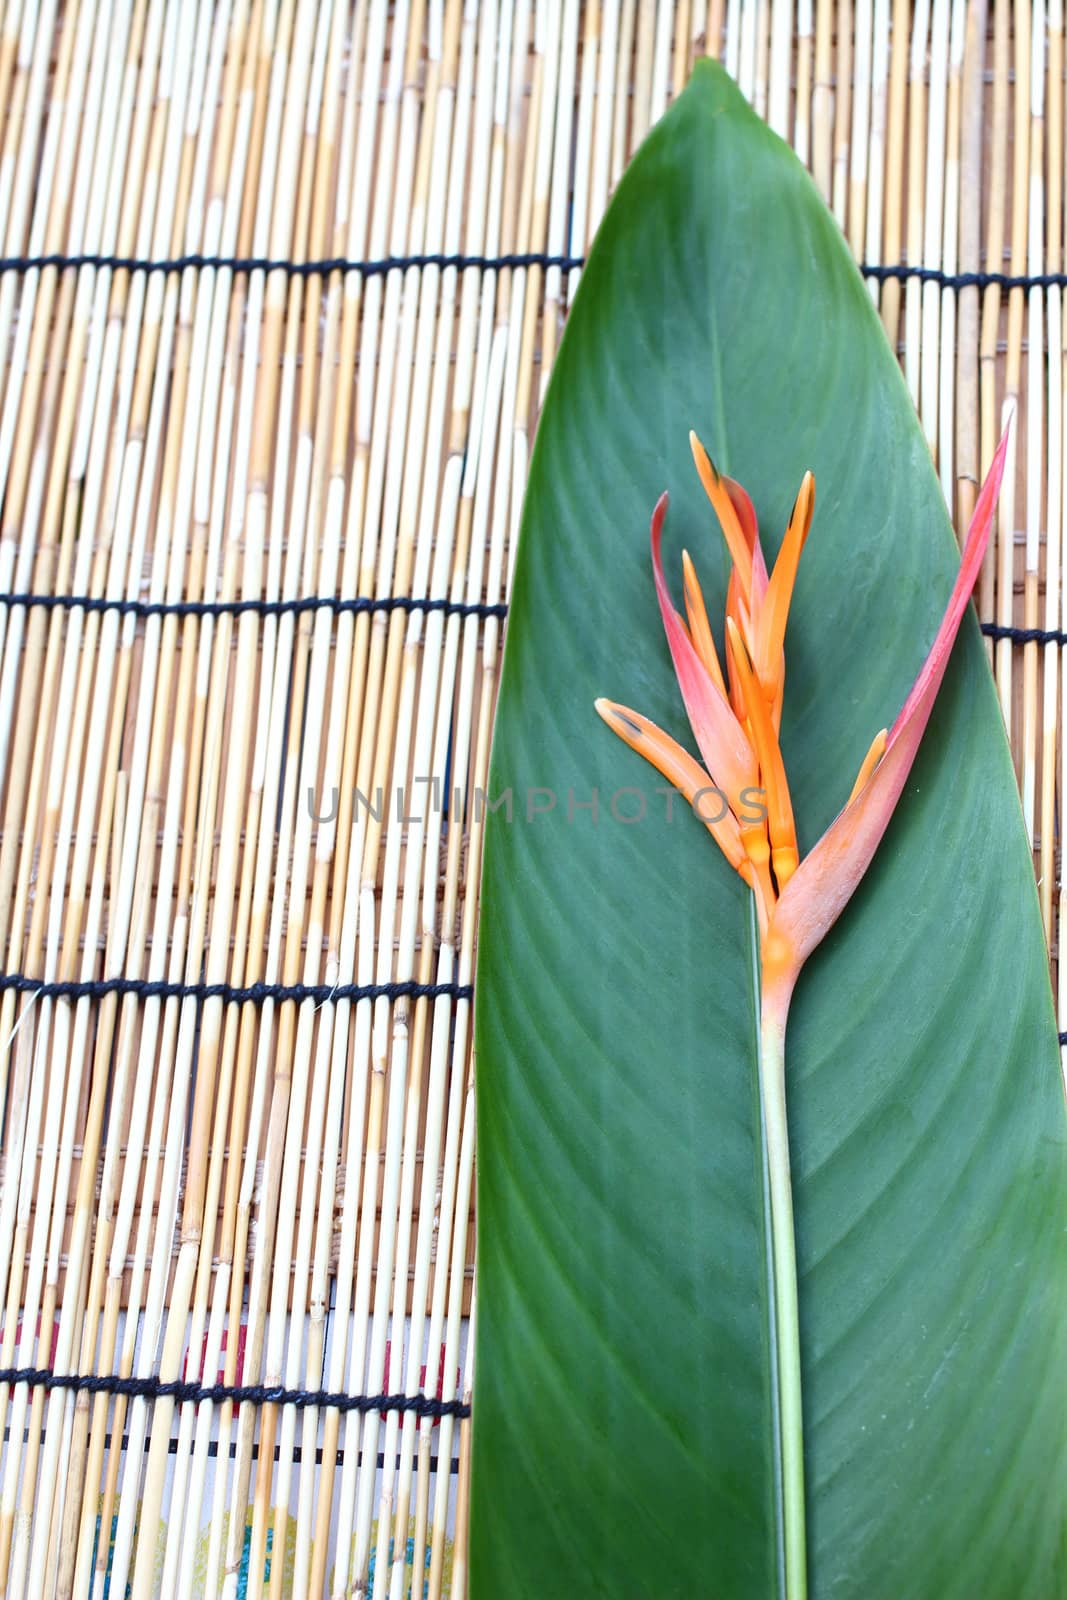 Heliconia flower and its leaf, put on the table cloth made from wooden